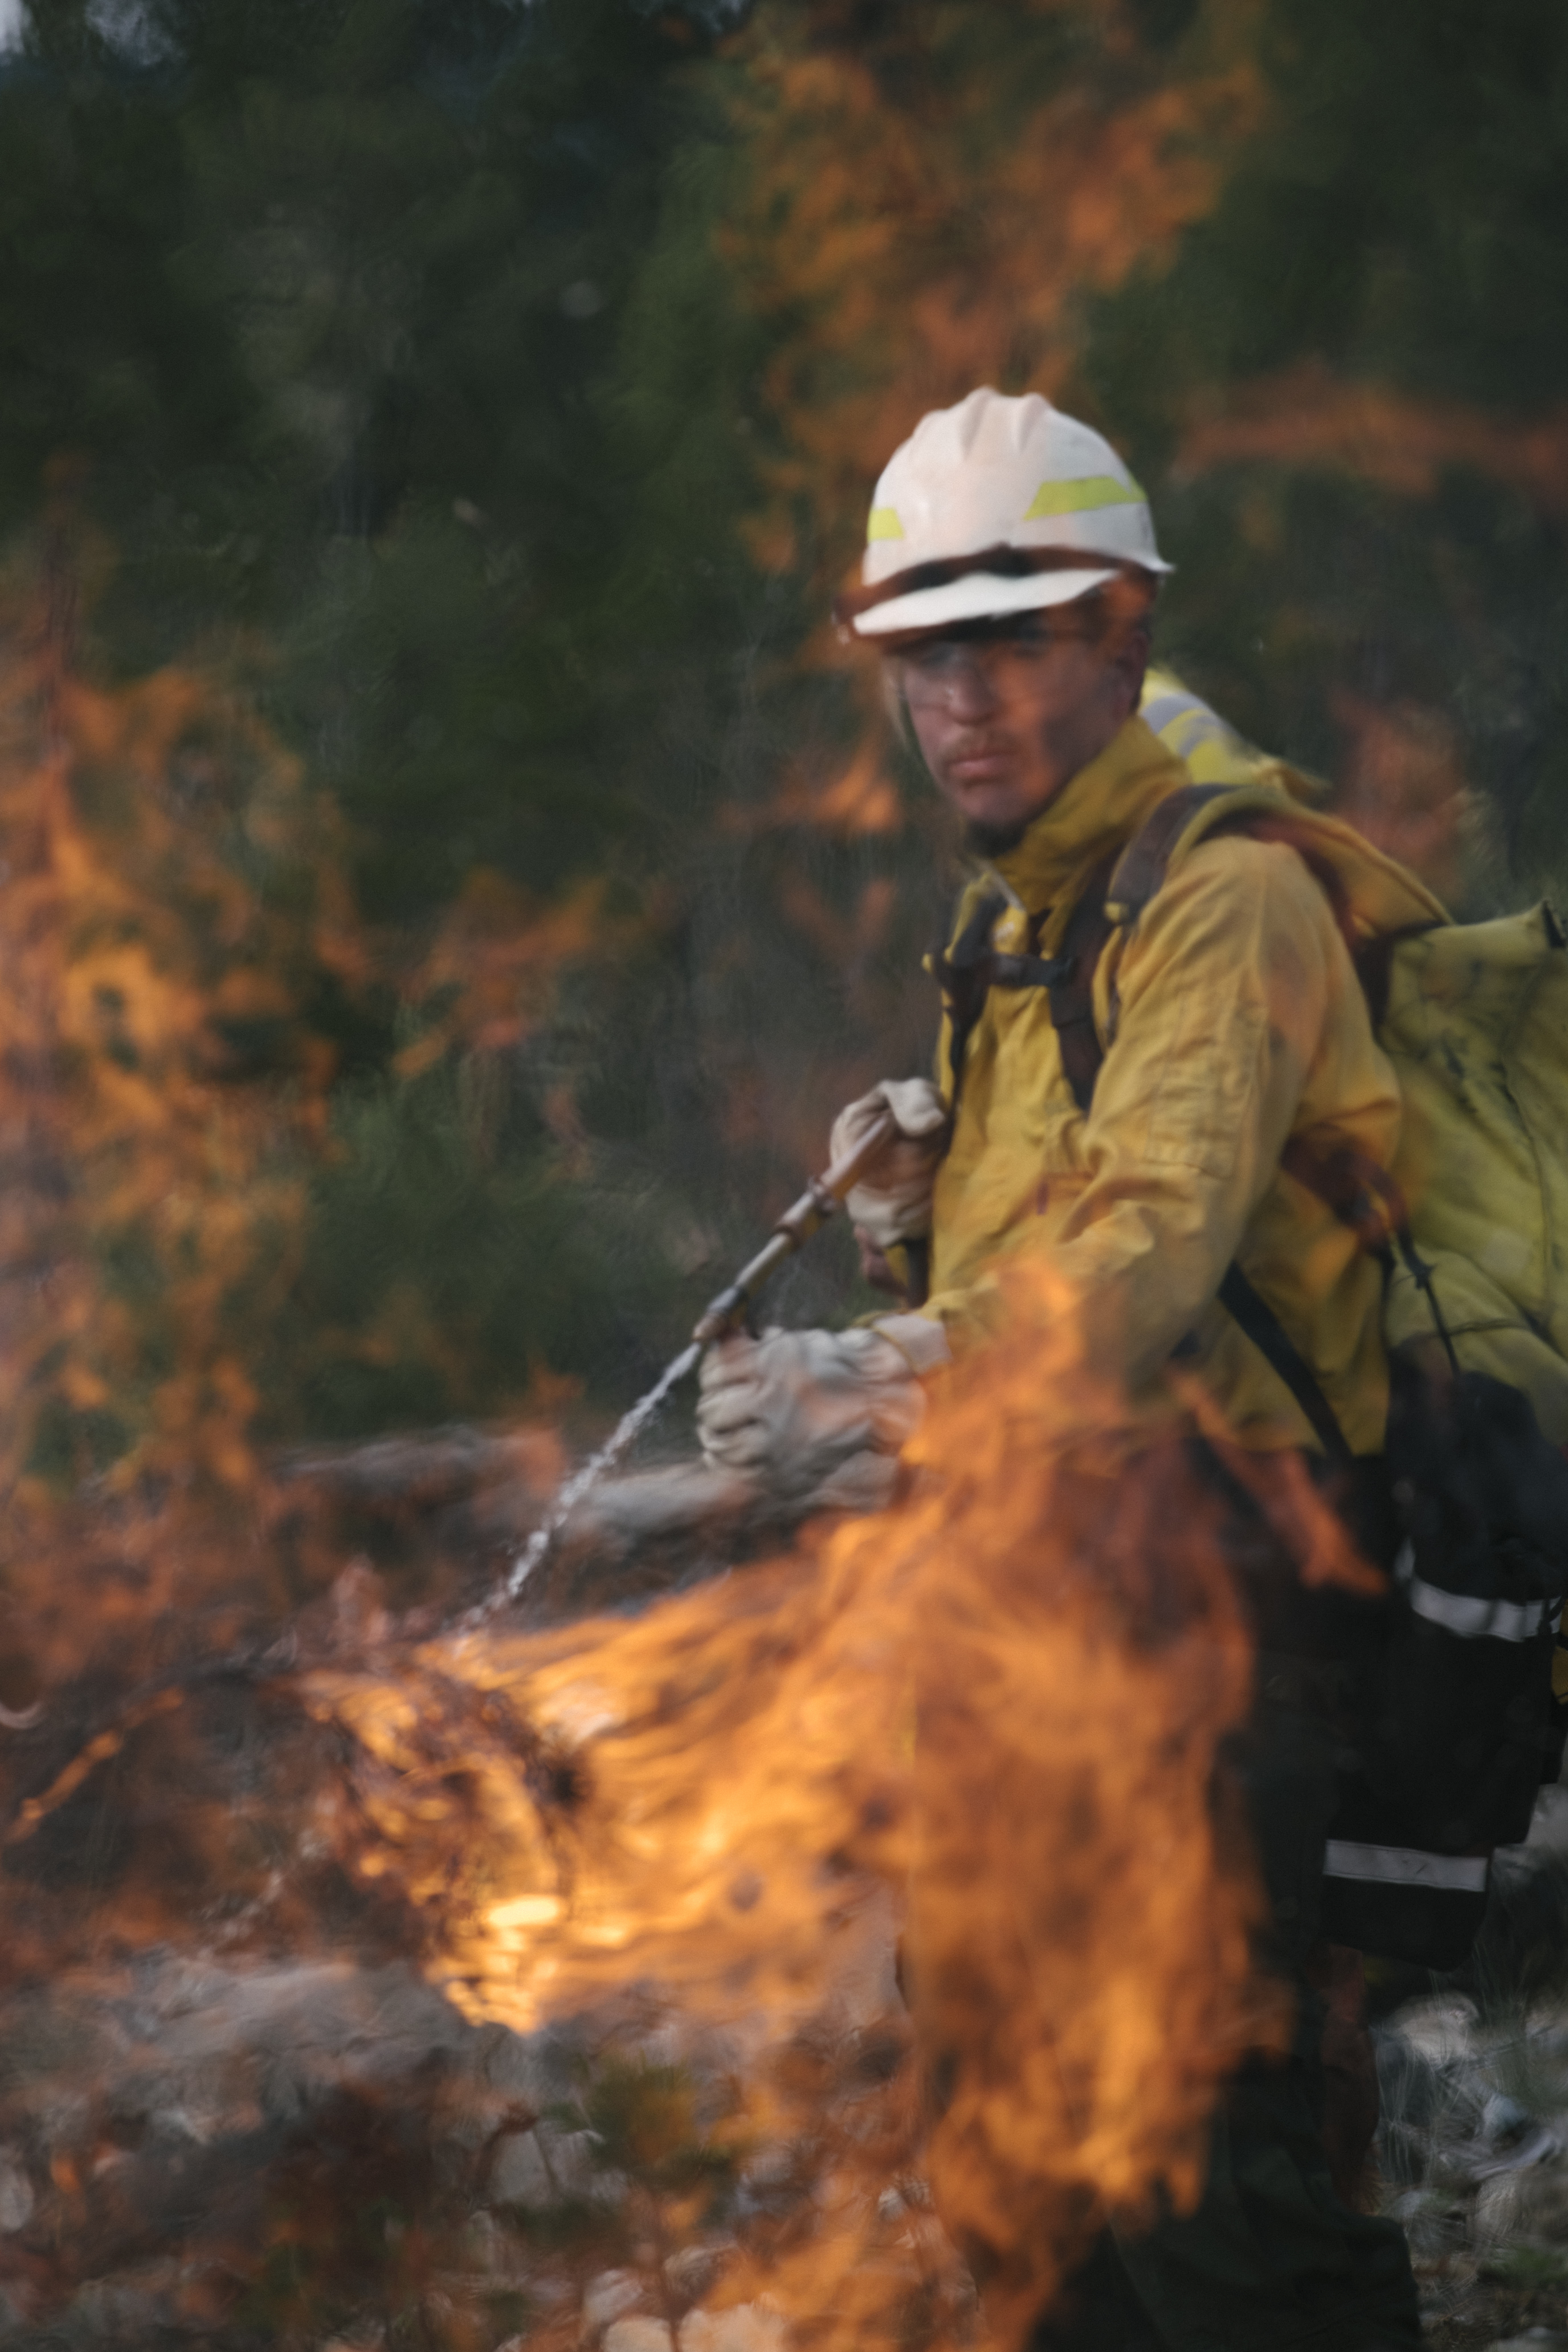 A man in a fire gear uses flame during a controlled burn